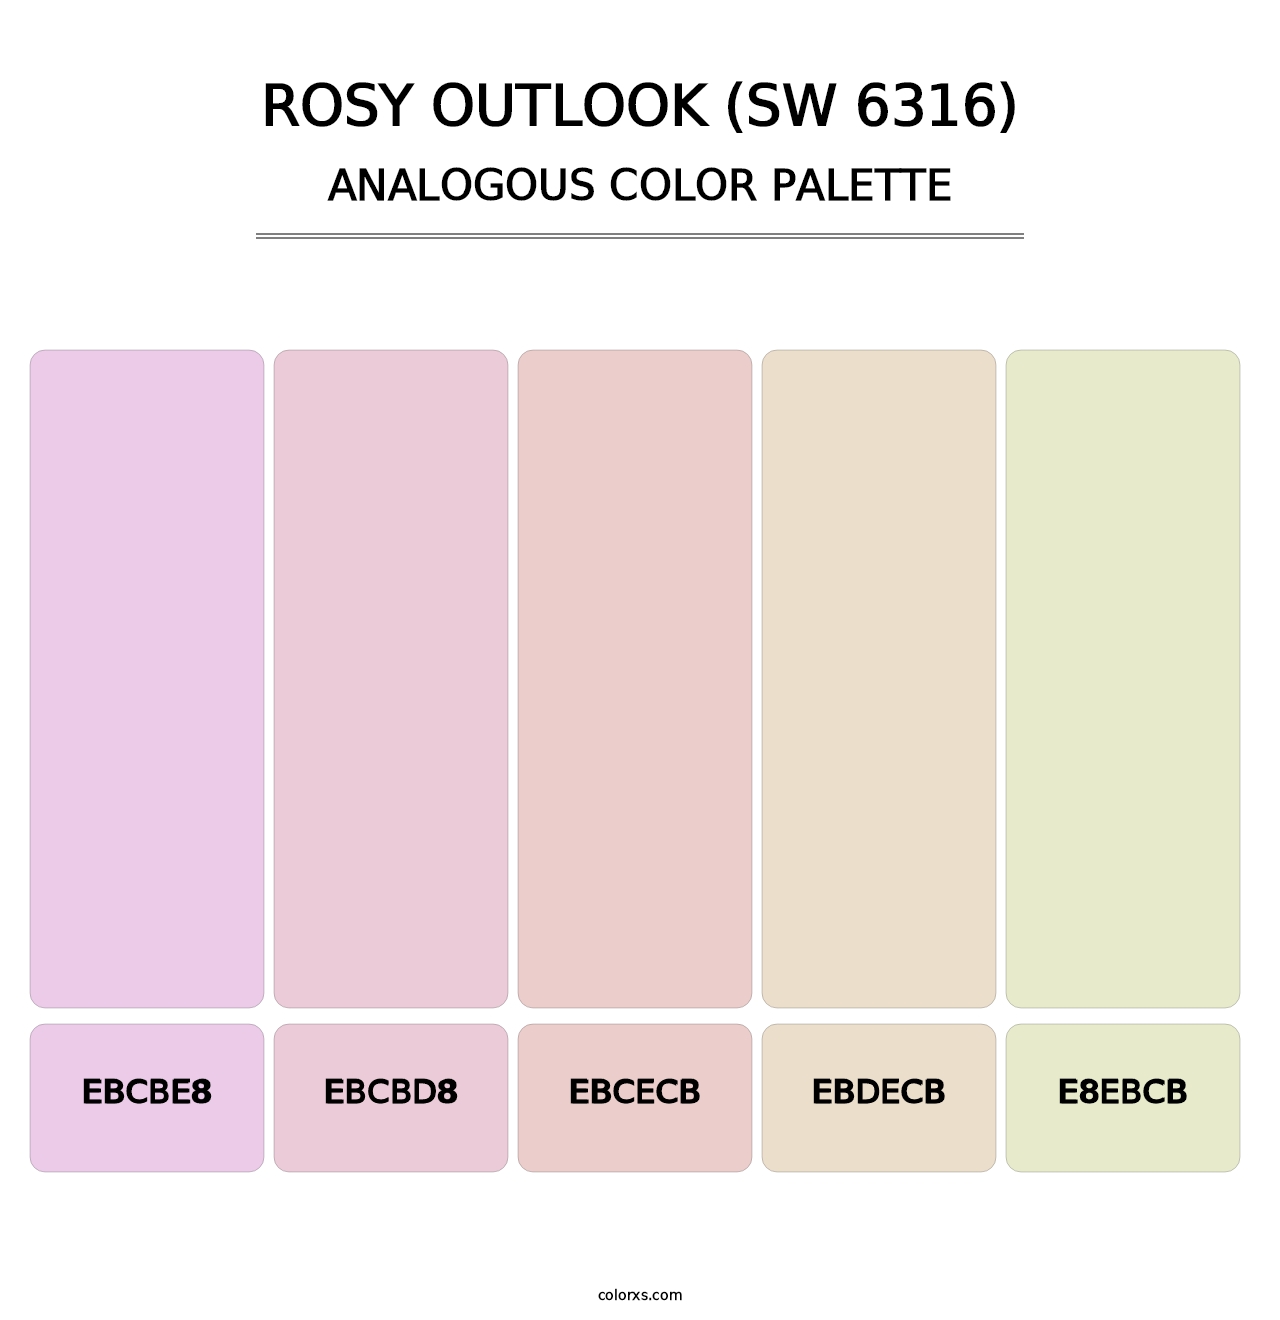 Rosy Outlook (SW 6316) - Analogous Color Palette